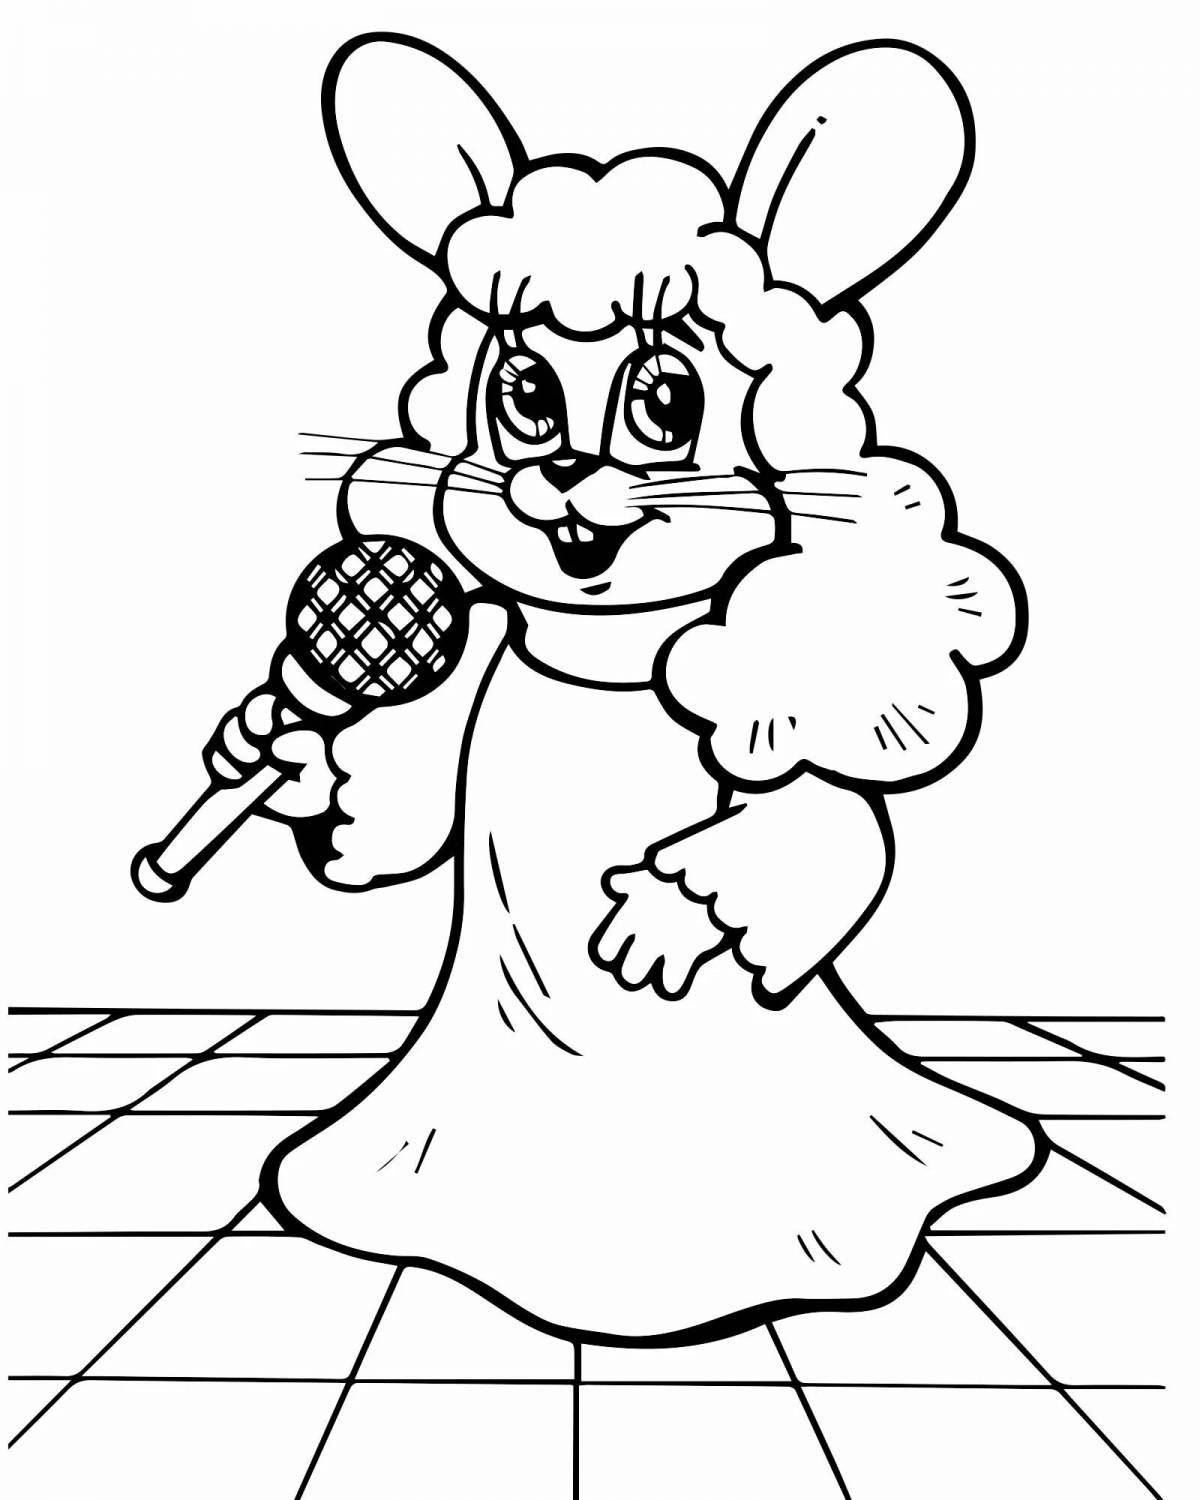 Bright coloring rabbit in a dress